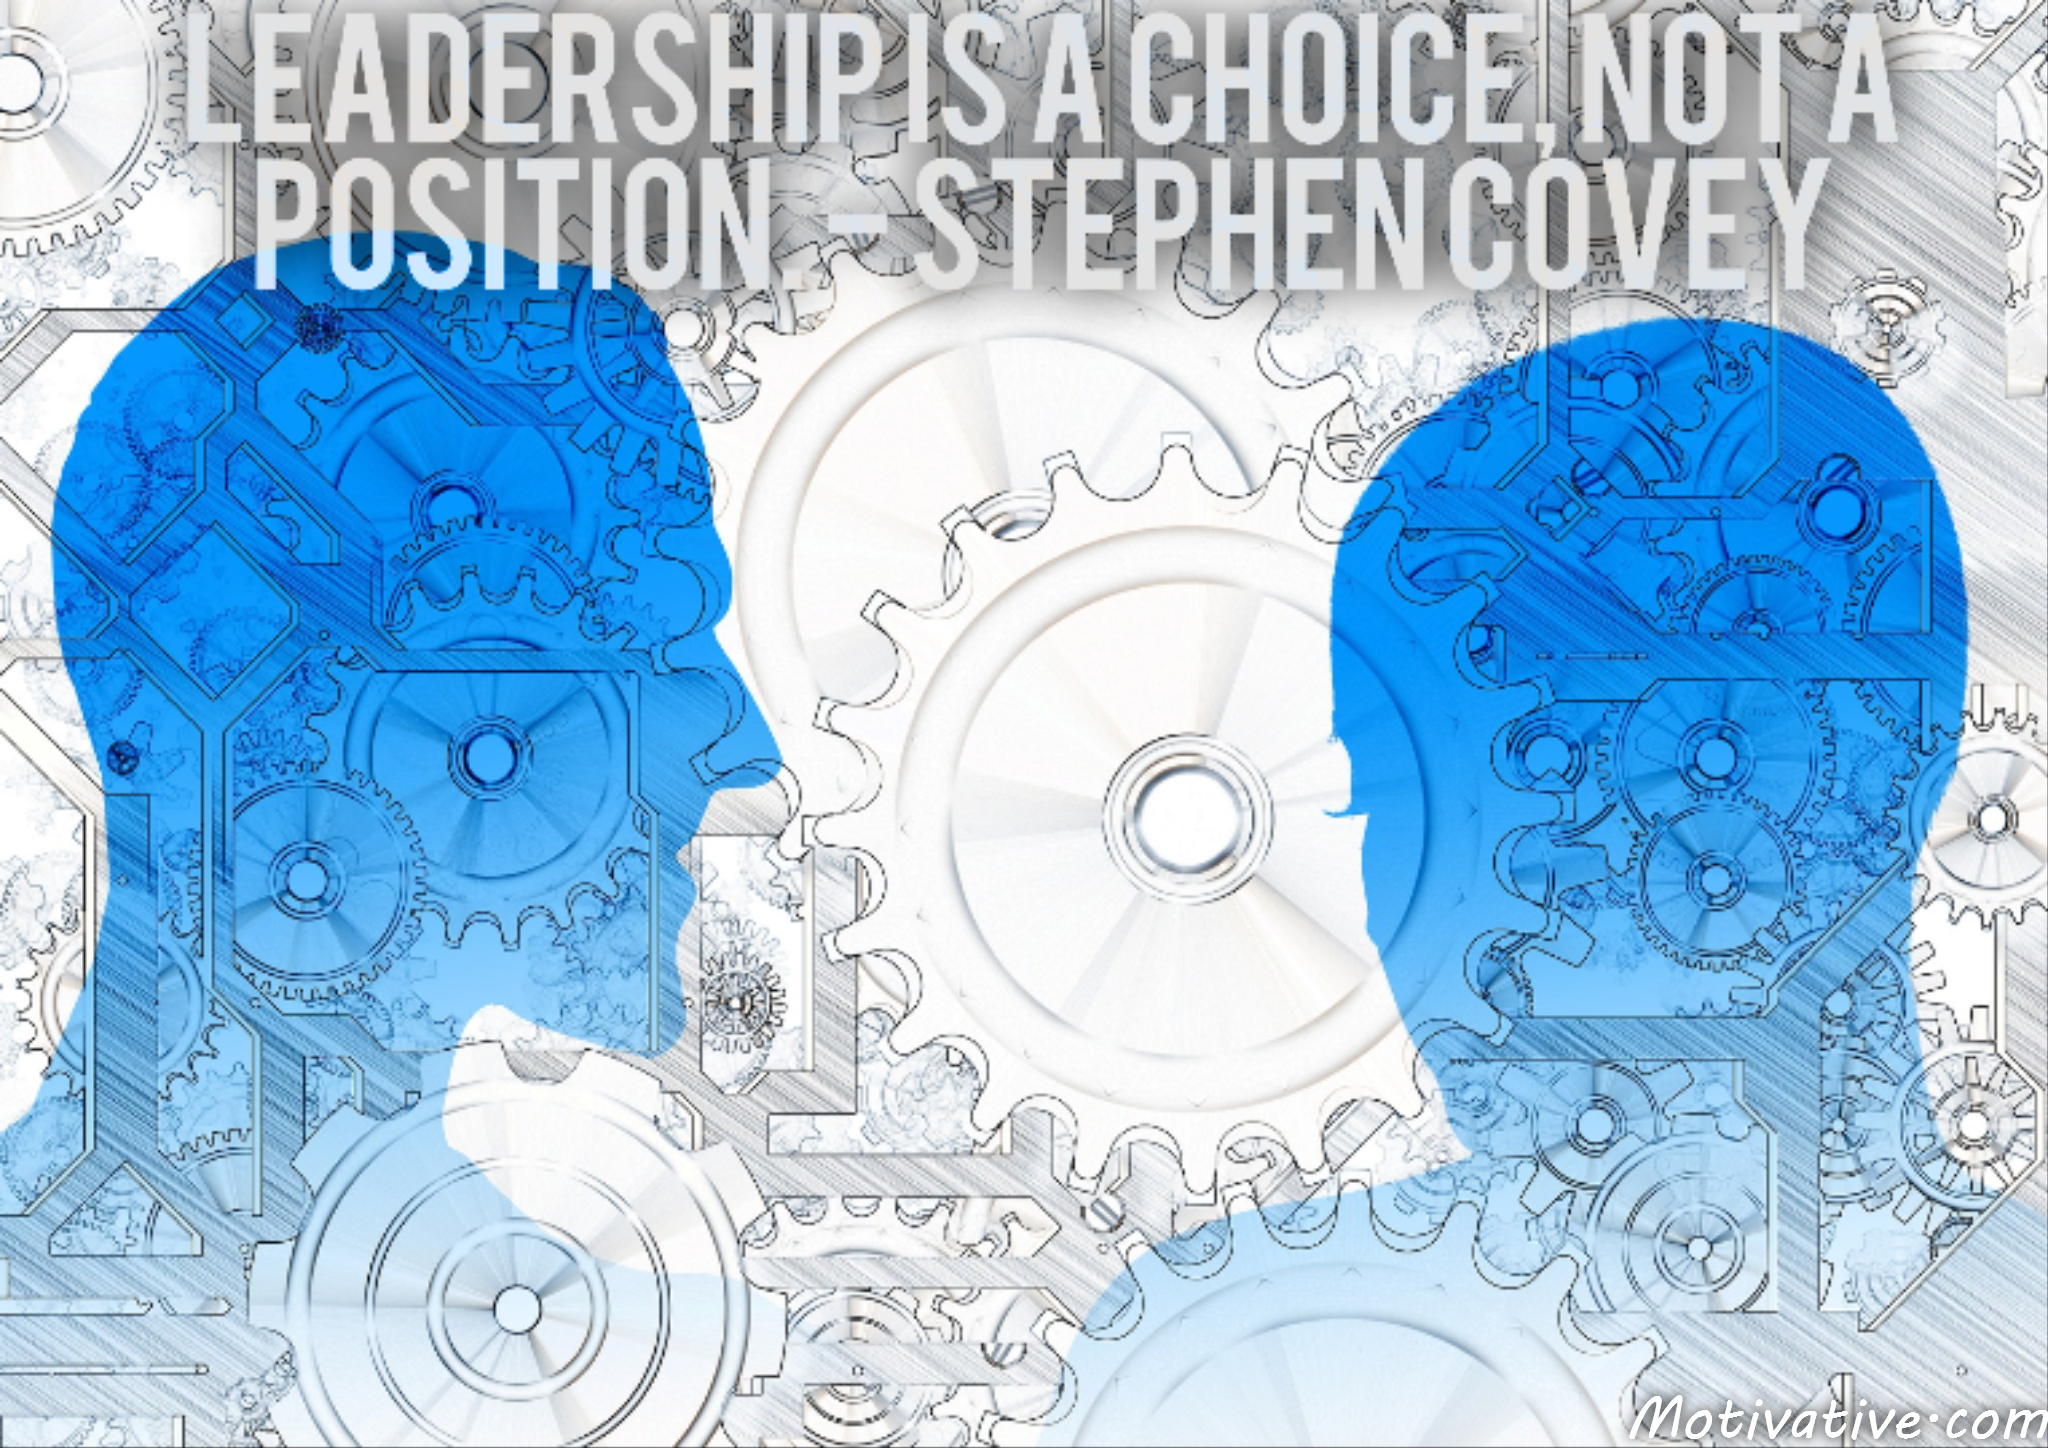 Leadership is a choice, not a position. – Stephen Covey